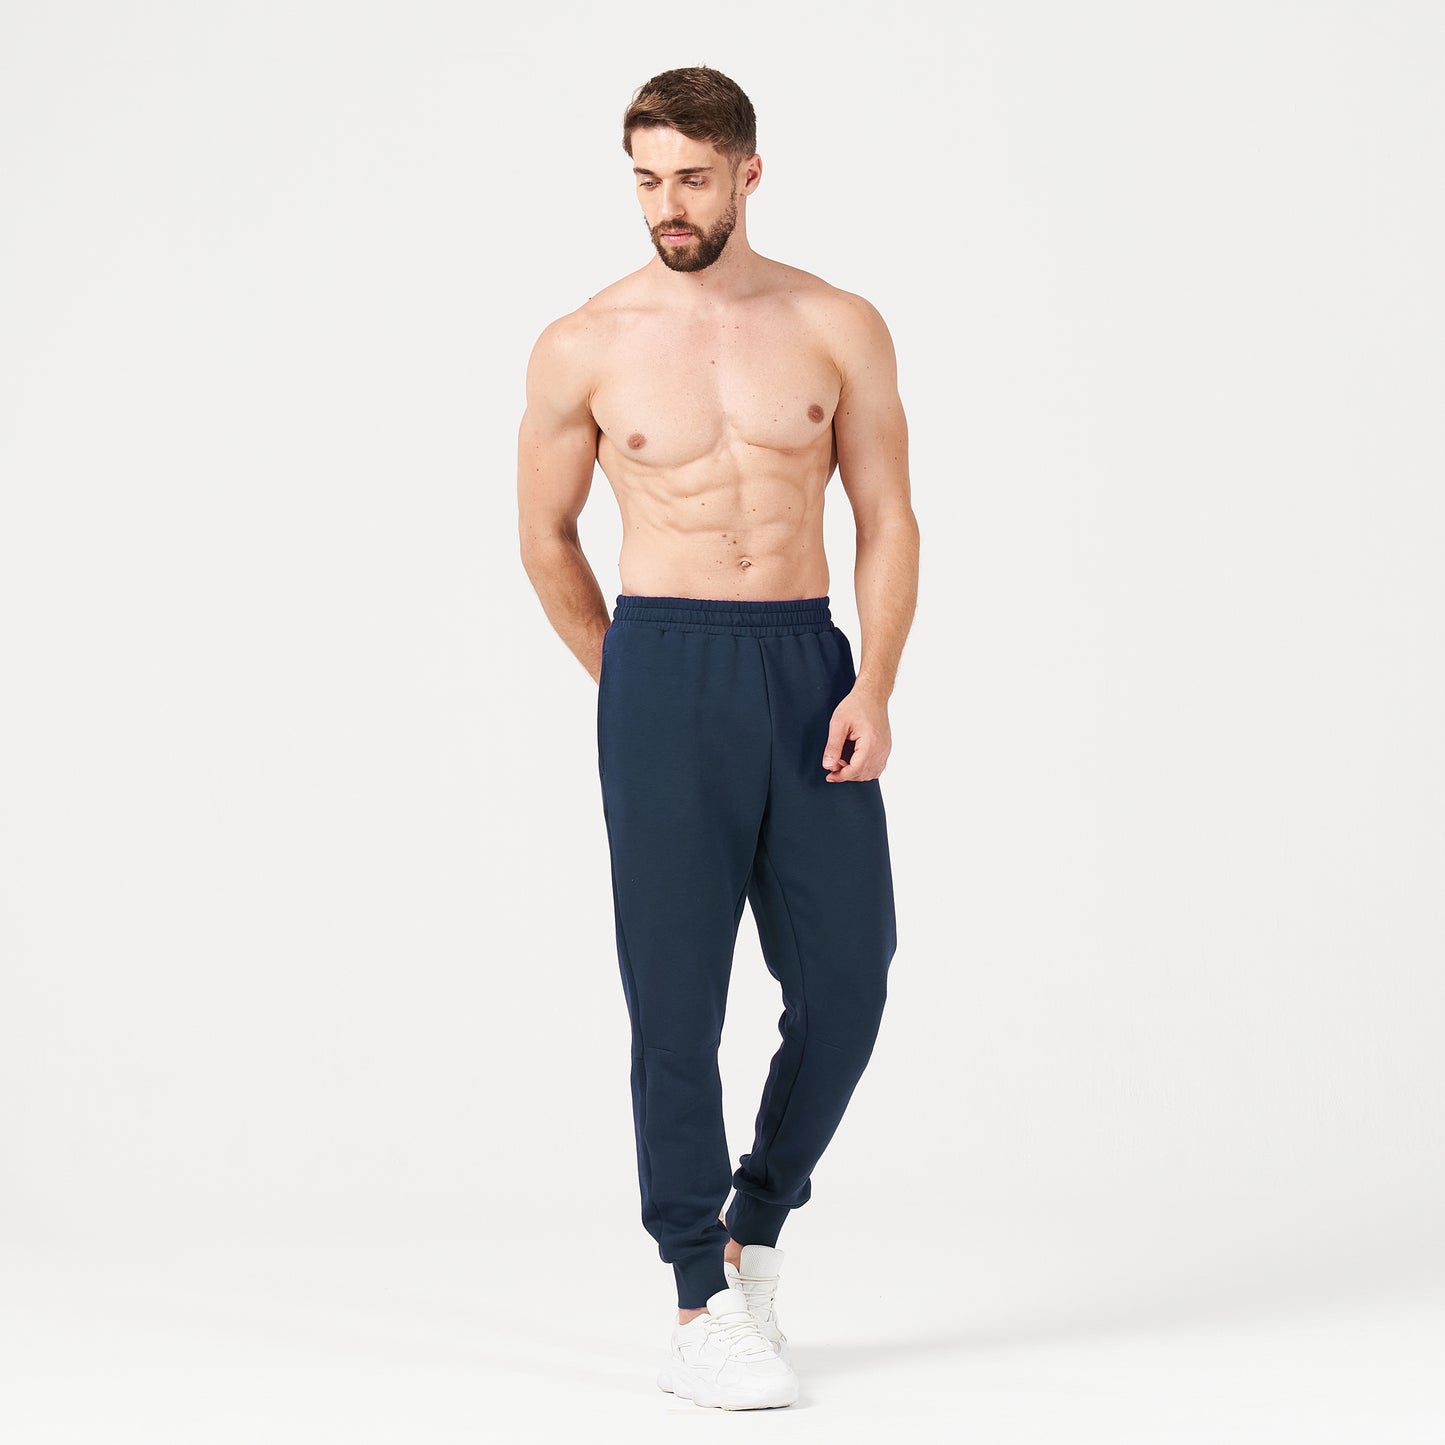 squatwolf-gym-wear-lab360-drylite-joggers-navy-workout-pants-for-men